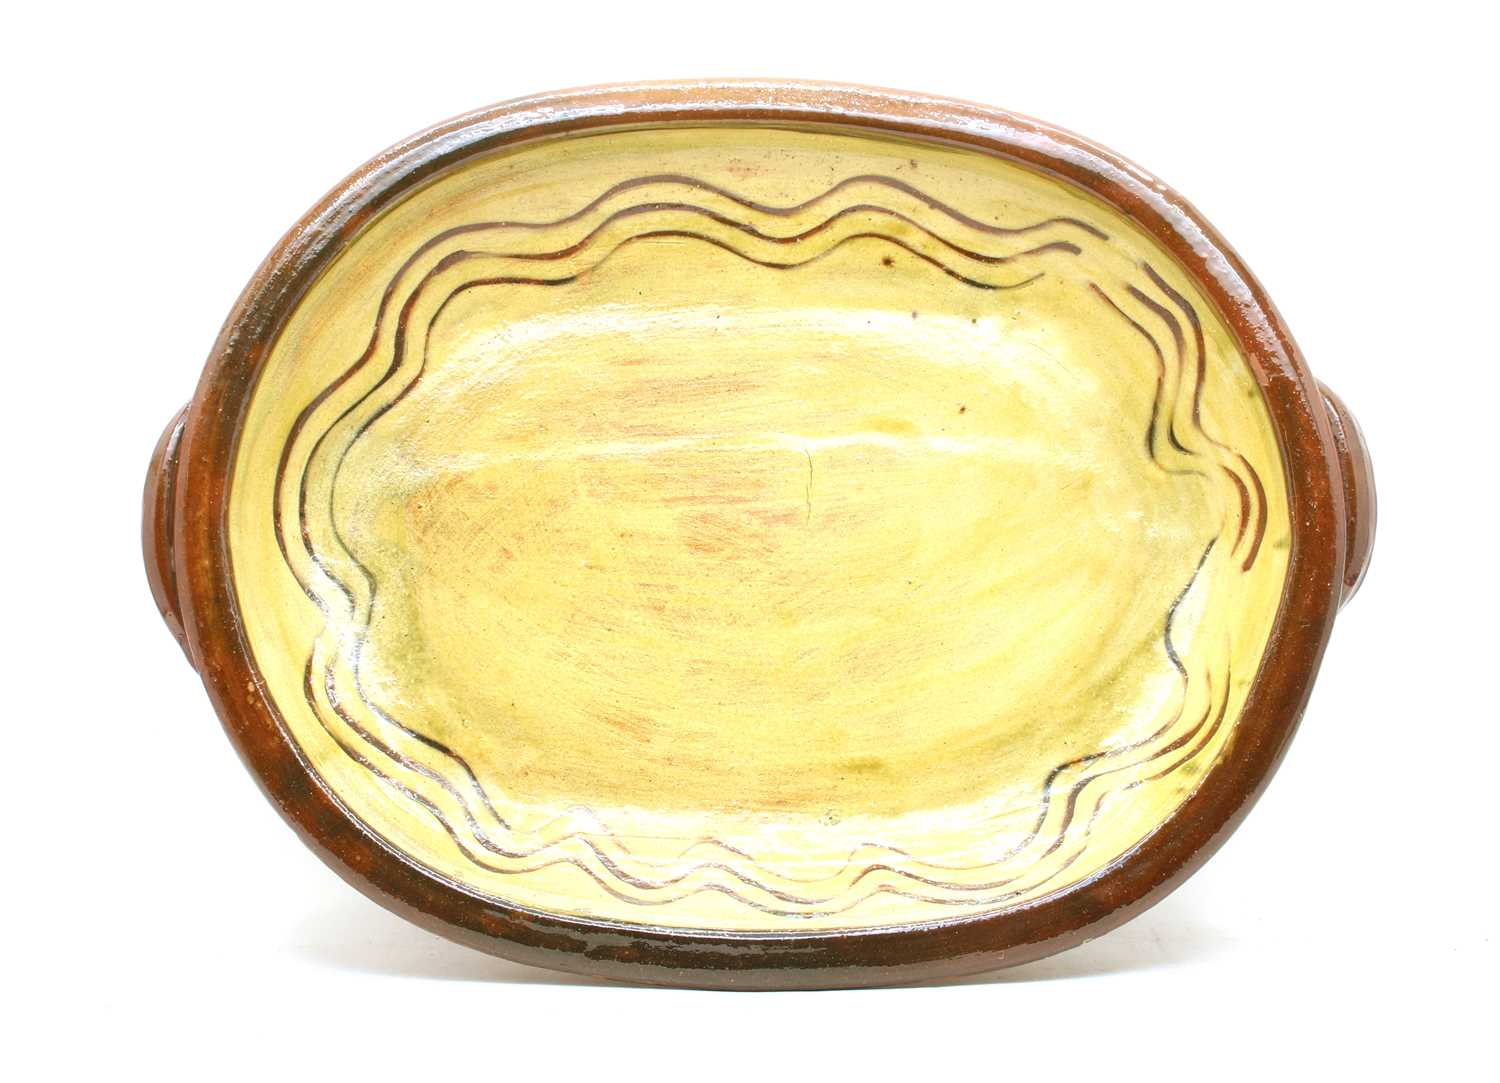 Lot 150 - A large combed slipware serving dish